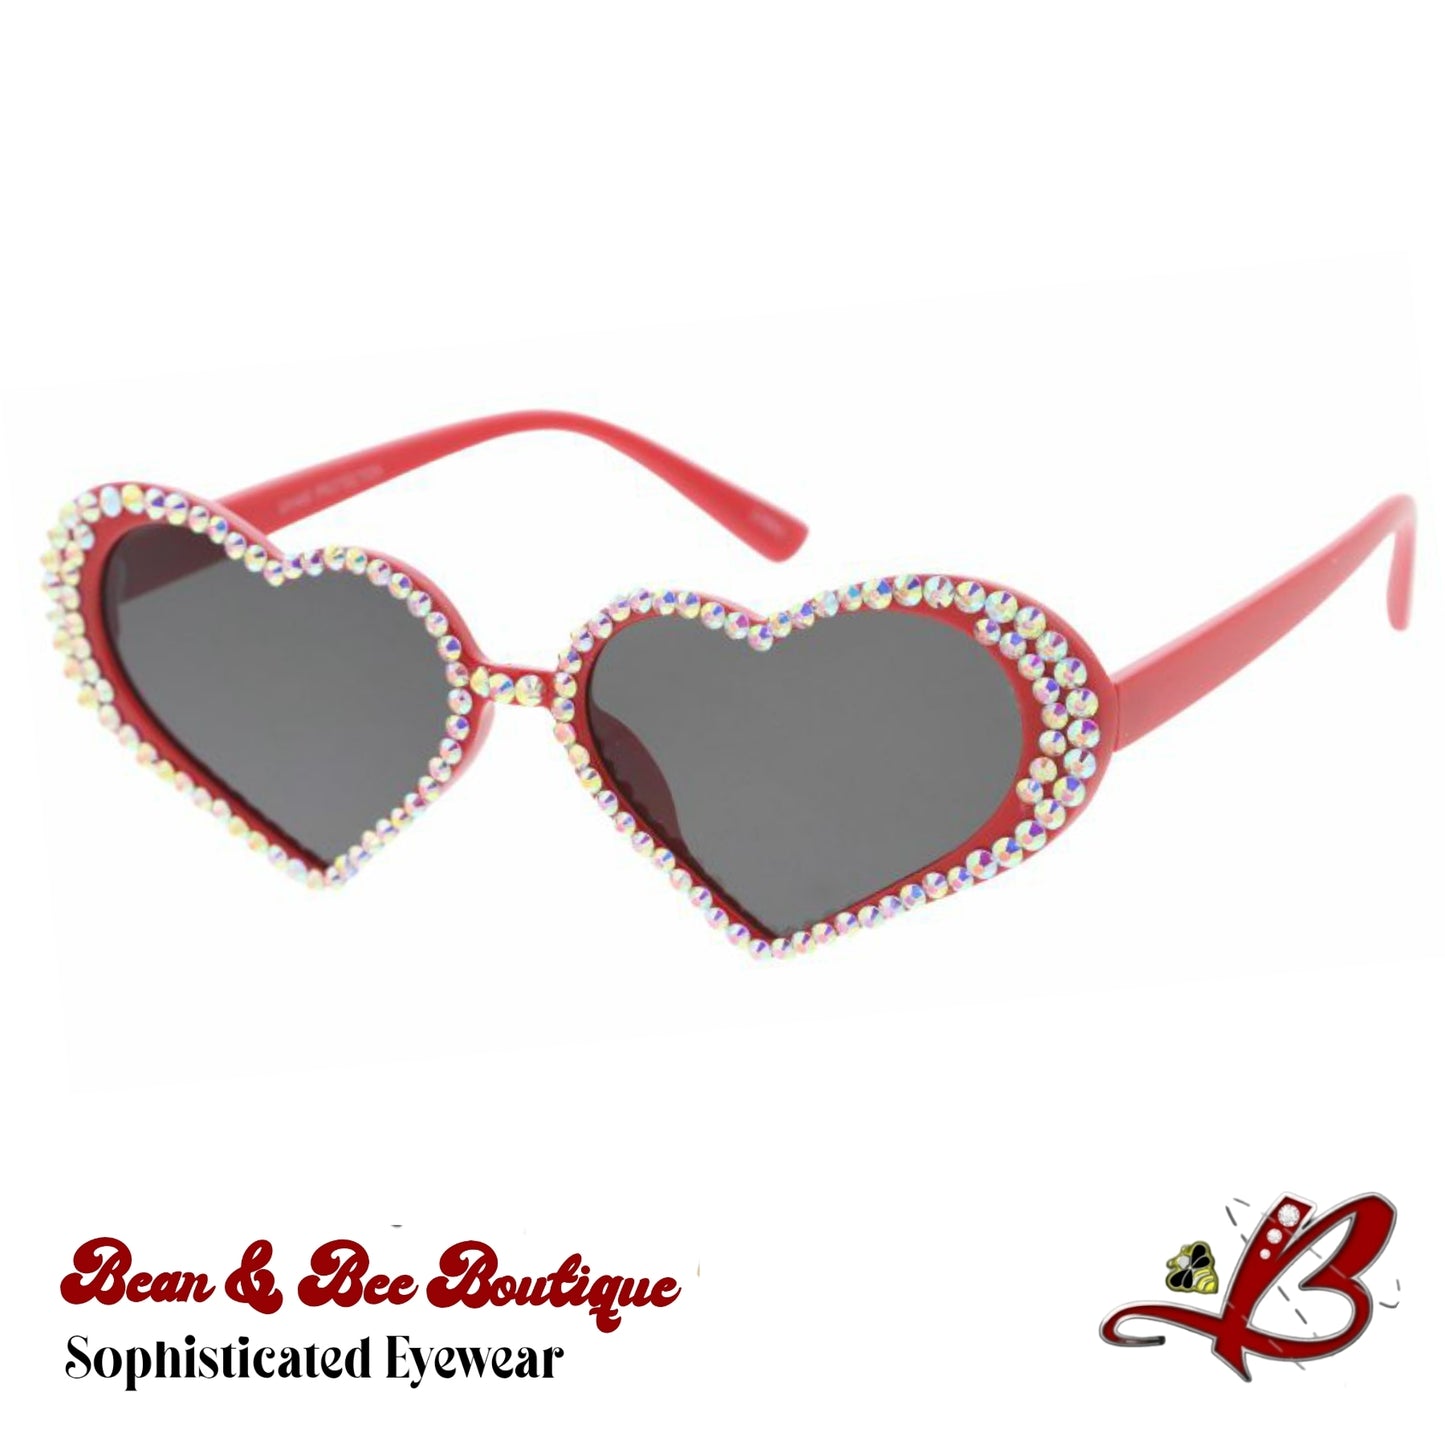 Eye Heart You Rhinestone Bling Outline Accent Luxury Designer Shades Full Rim Special Edition Heart Shaped Frame Vintage Modern 100% UV Protection Sunglasses